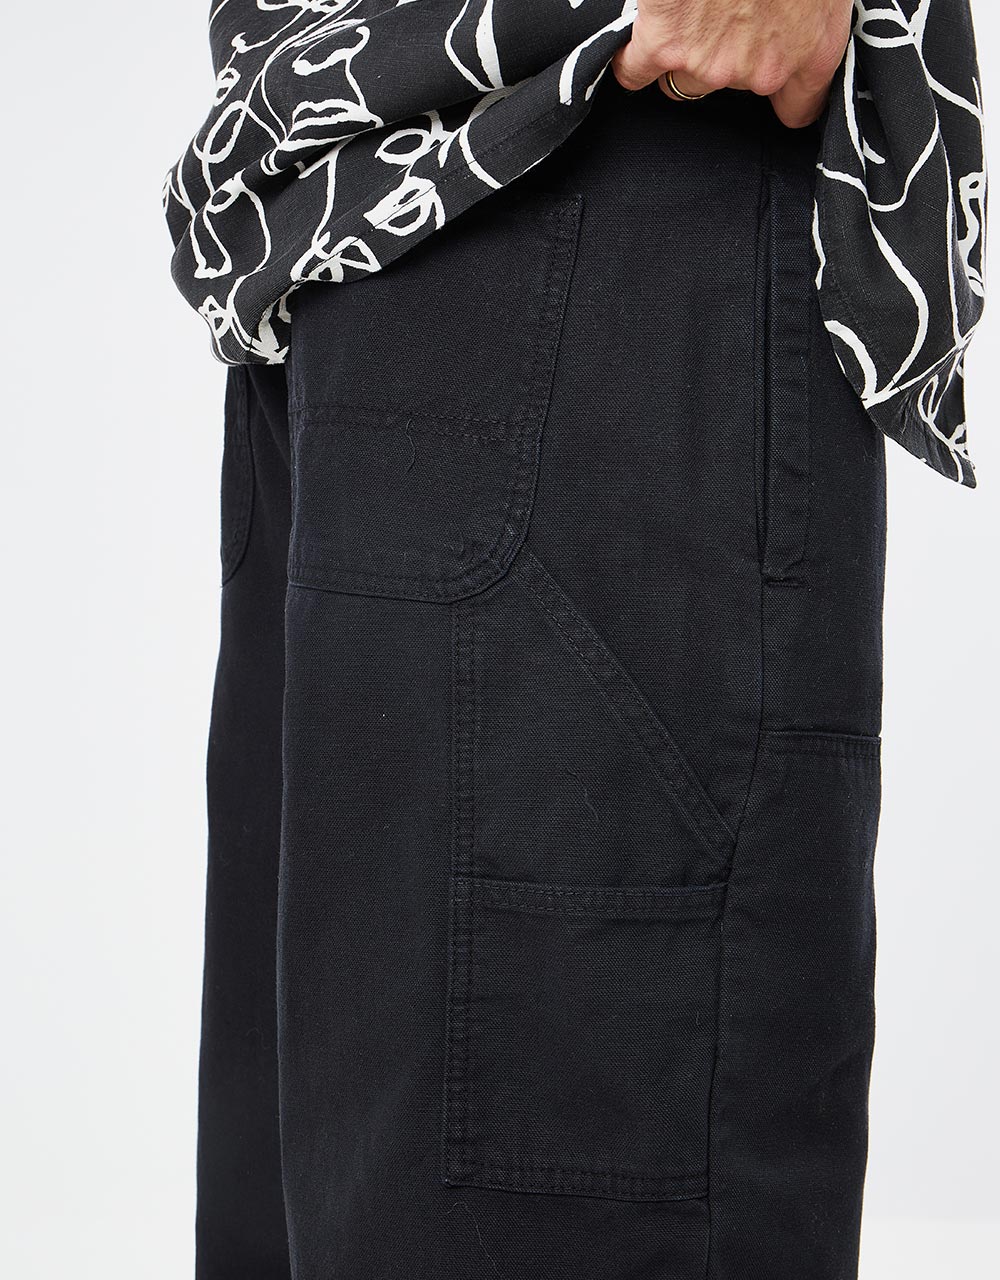 Route One Double Knee Heavyweight Canvas Pants - Black